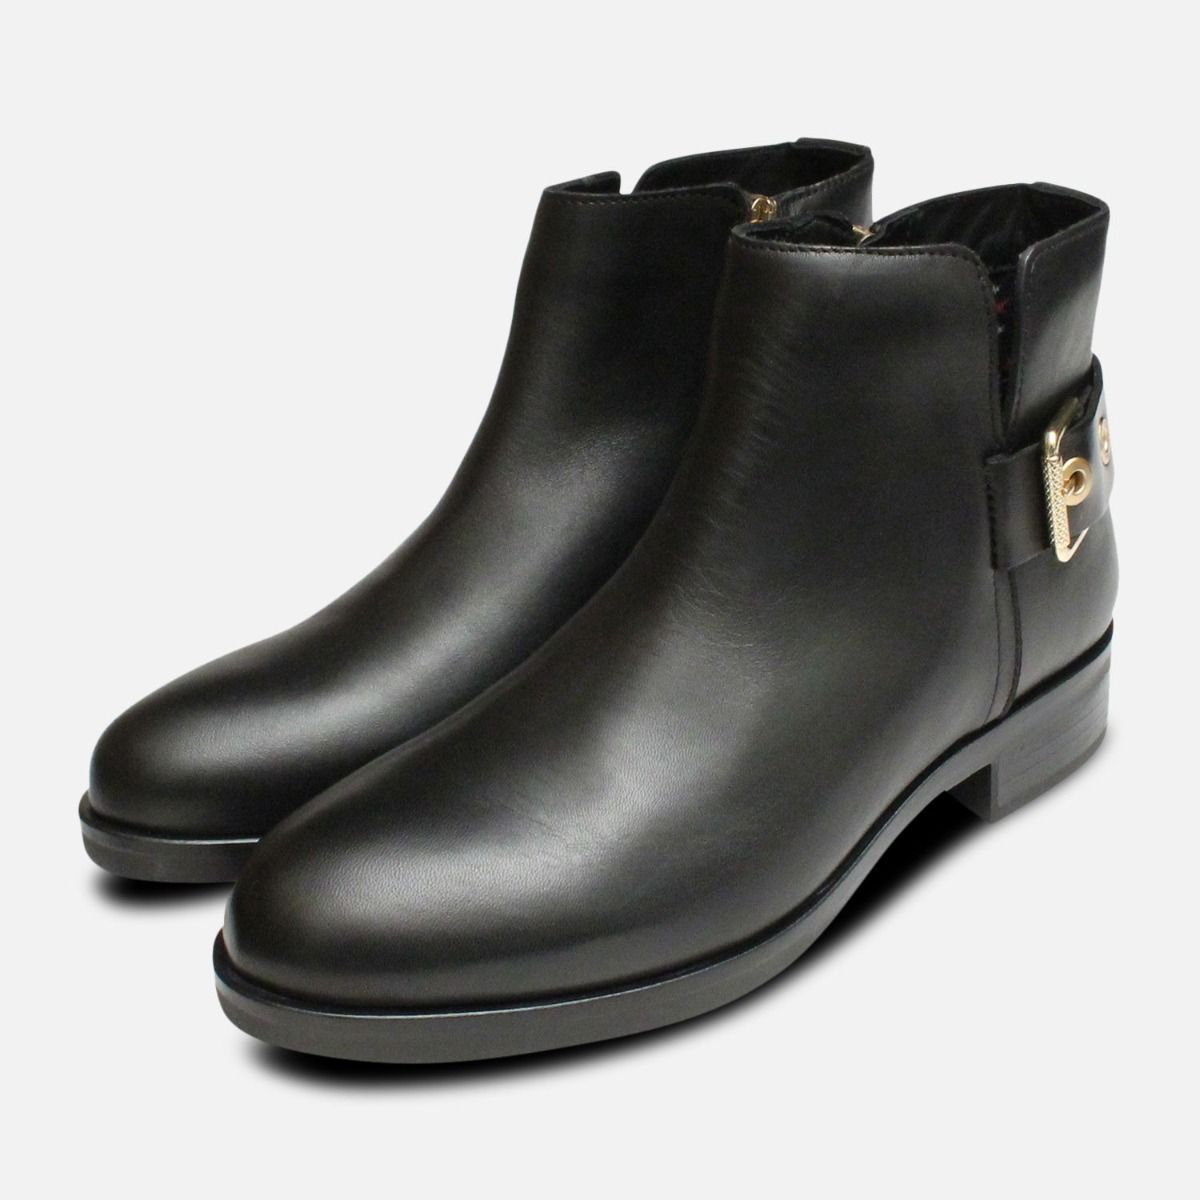 Tessa Buckle Ankle Boots in Black by Tommy Hilfiger